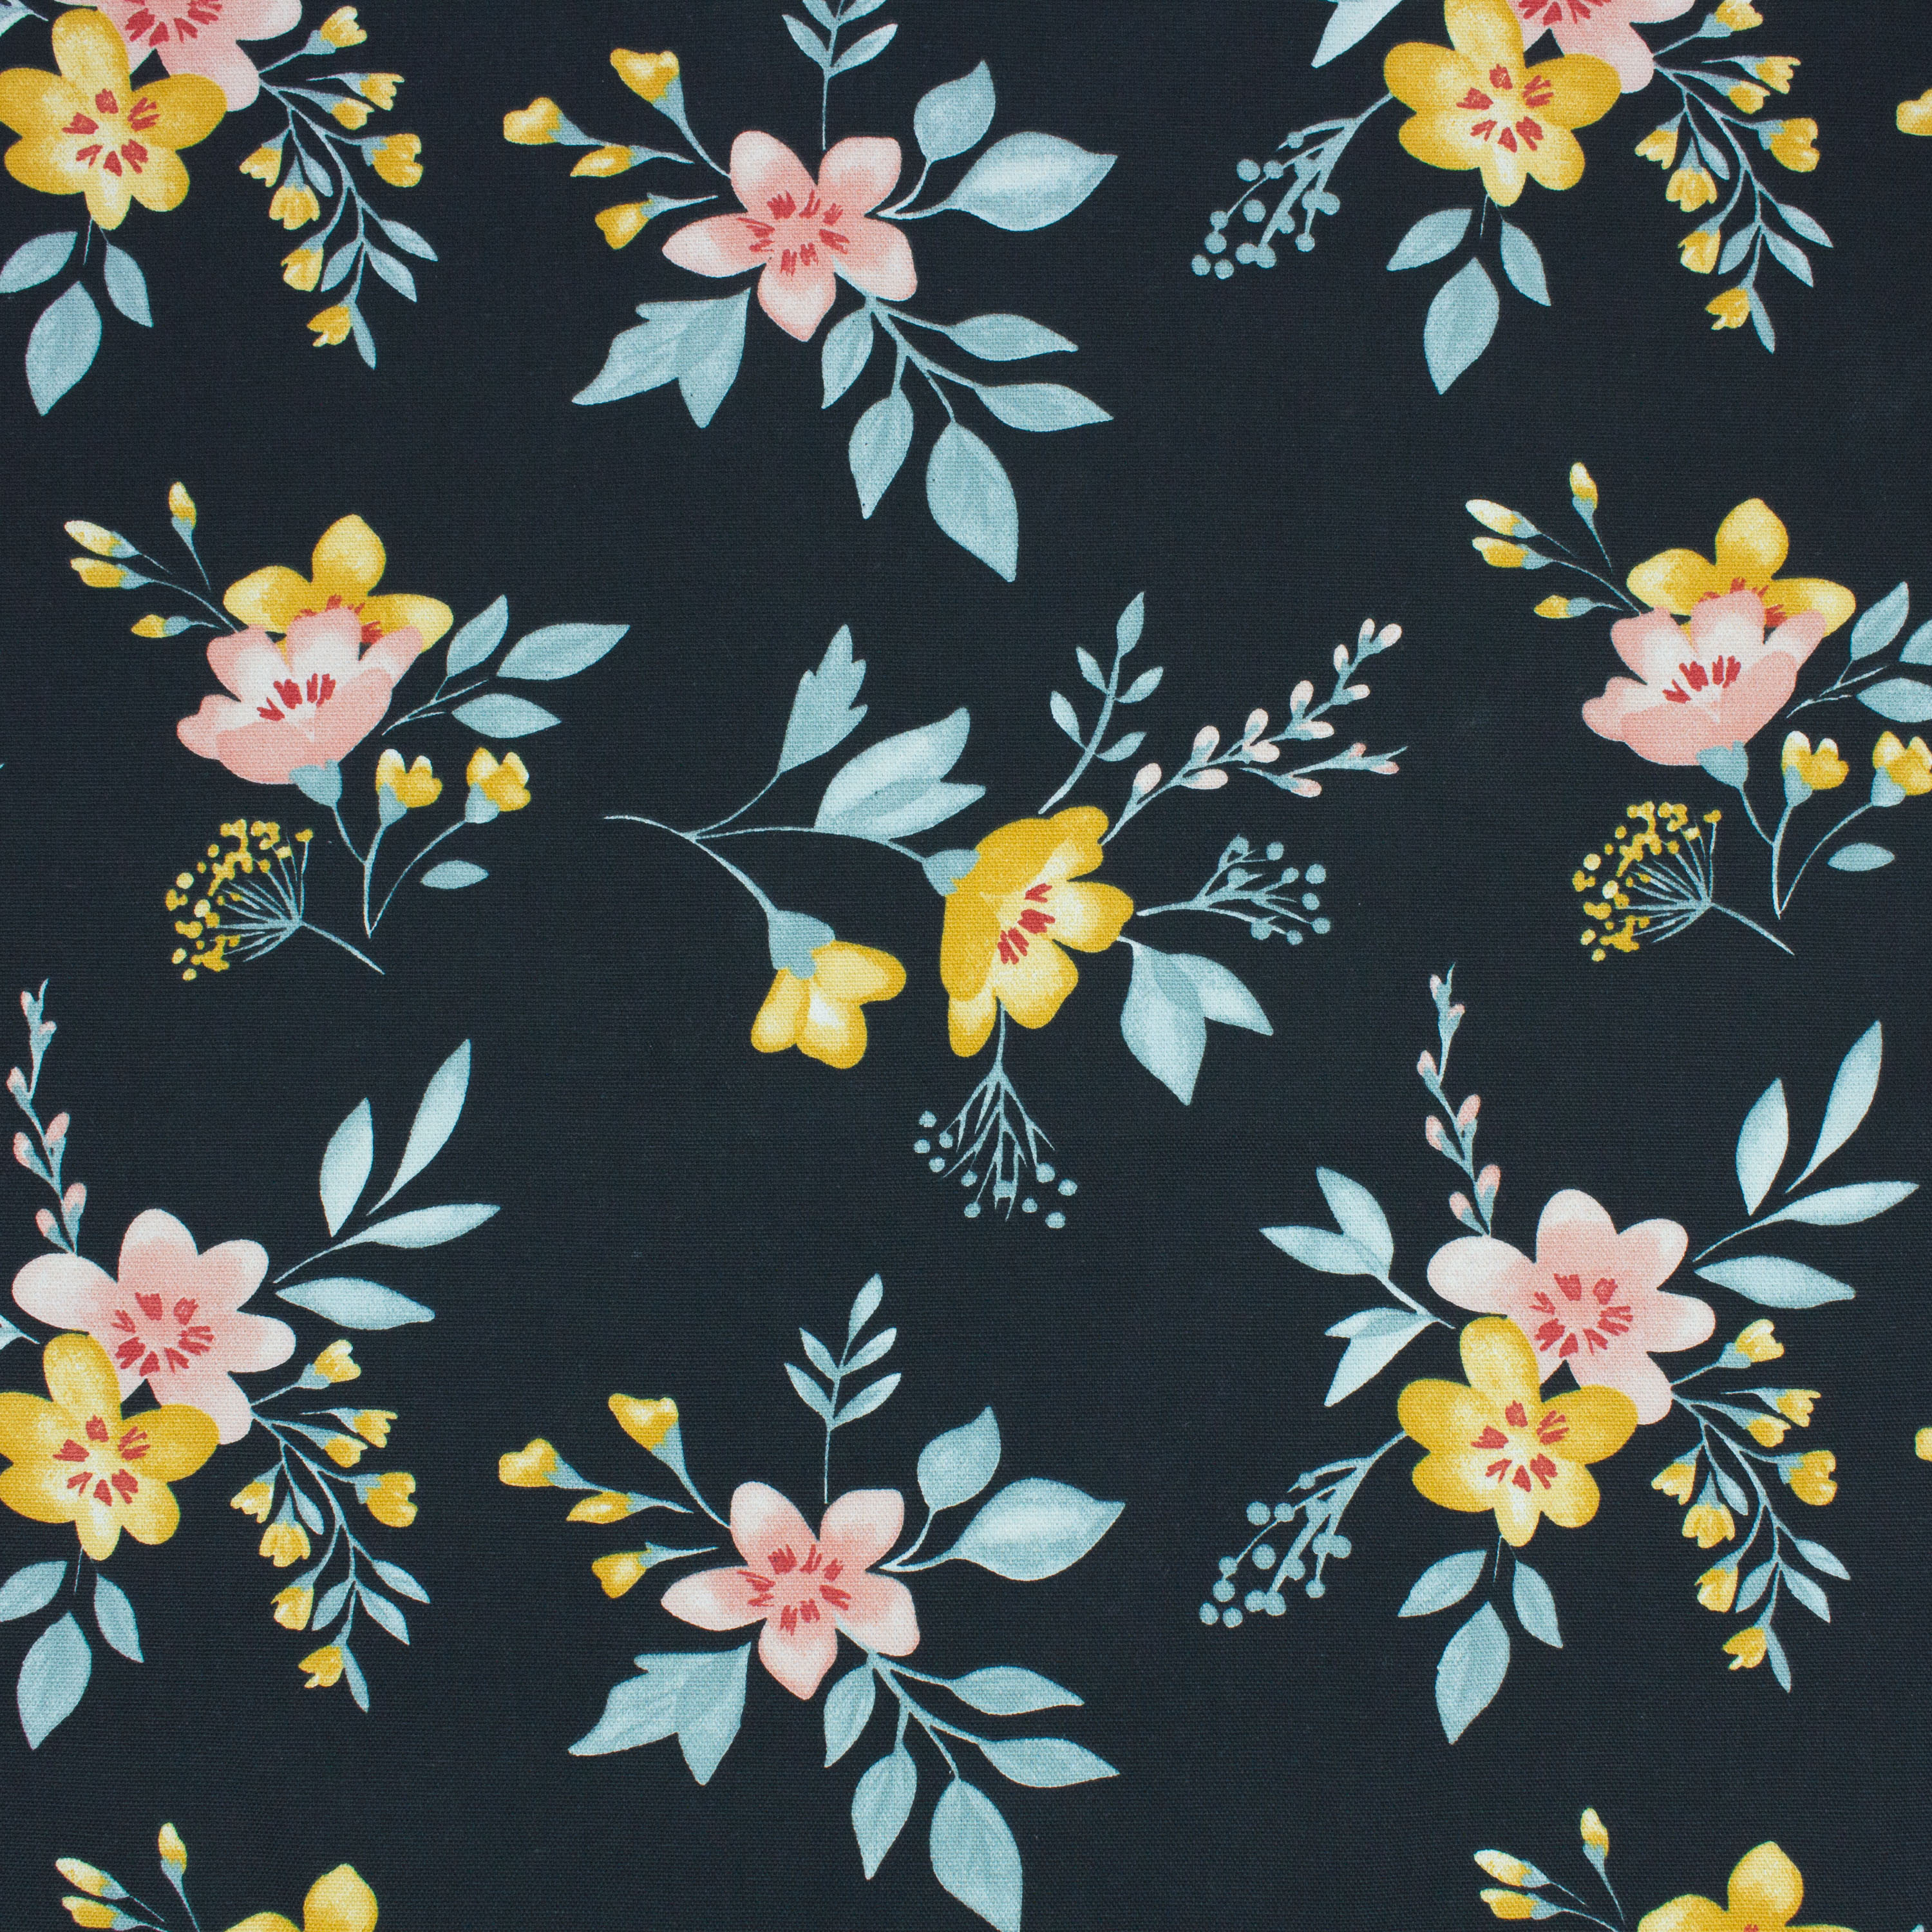 Better Homes & Gardens 100% Cotton Floral Black, 2 Yard Precut Fabric - image 1 of 6